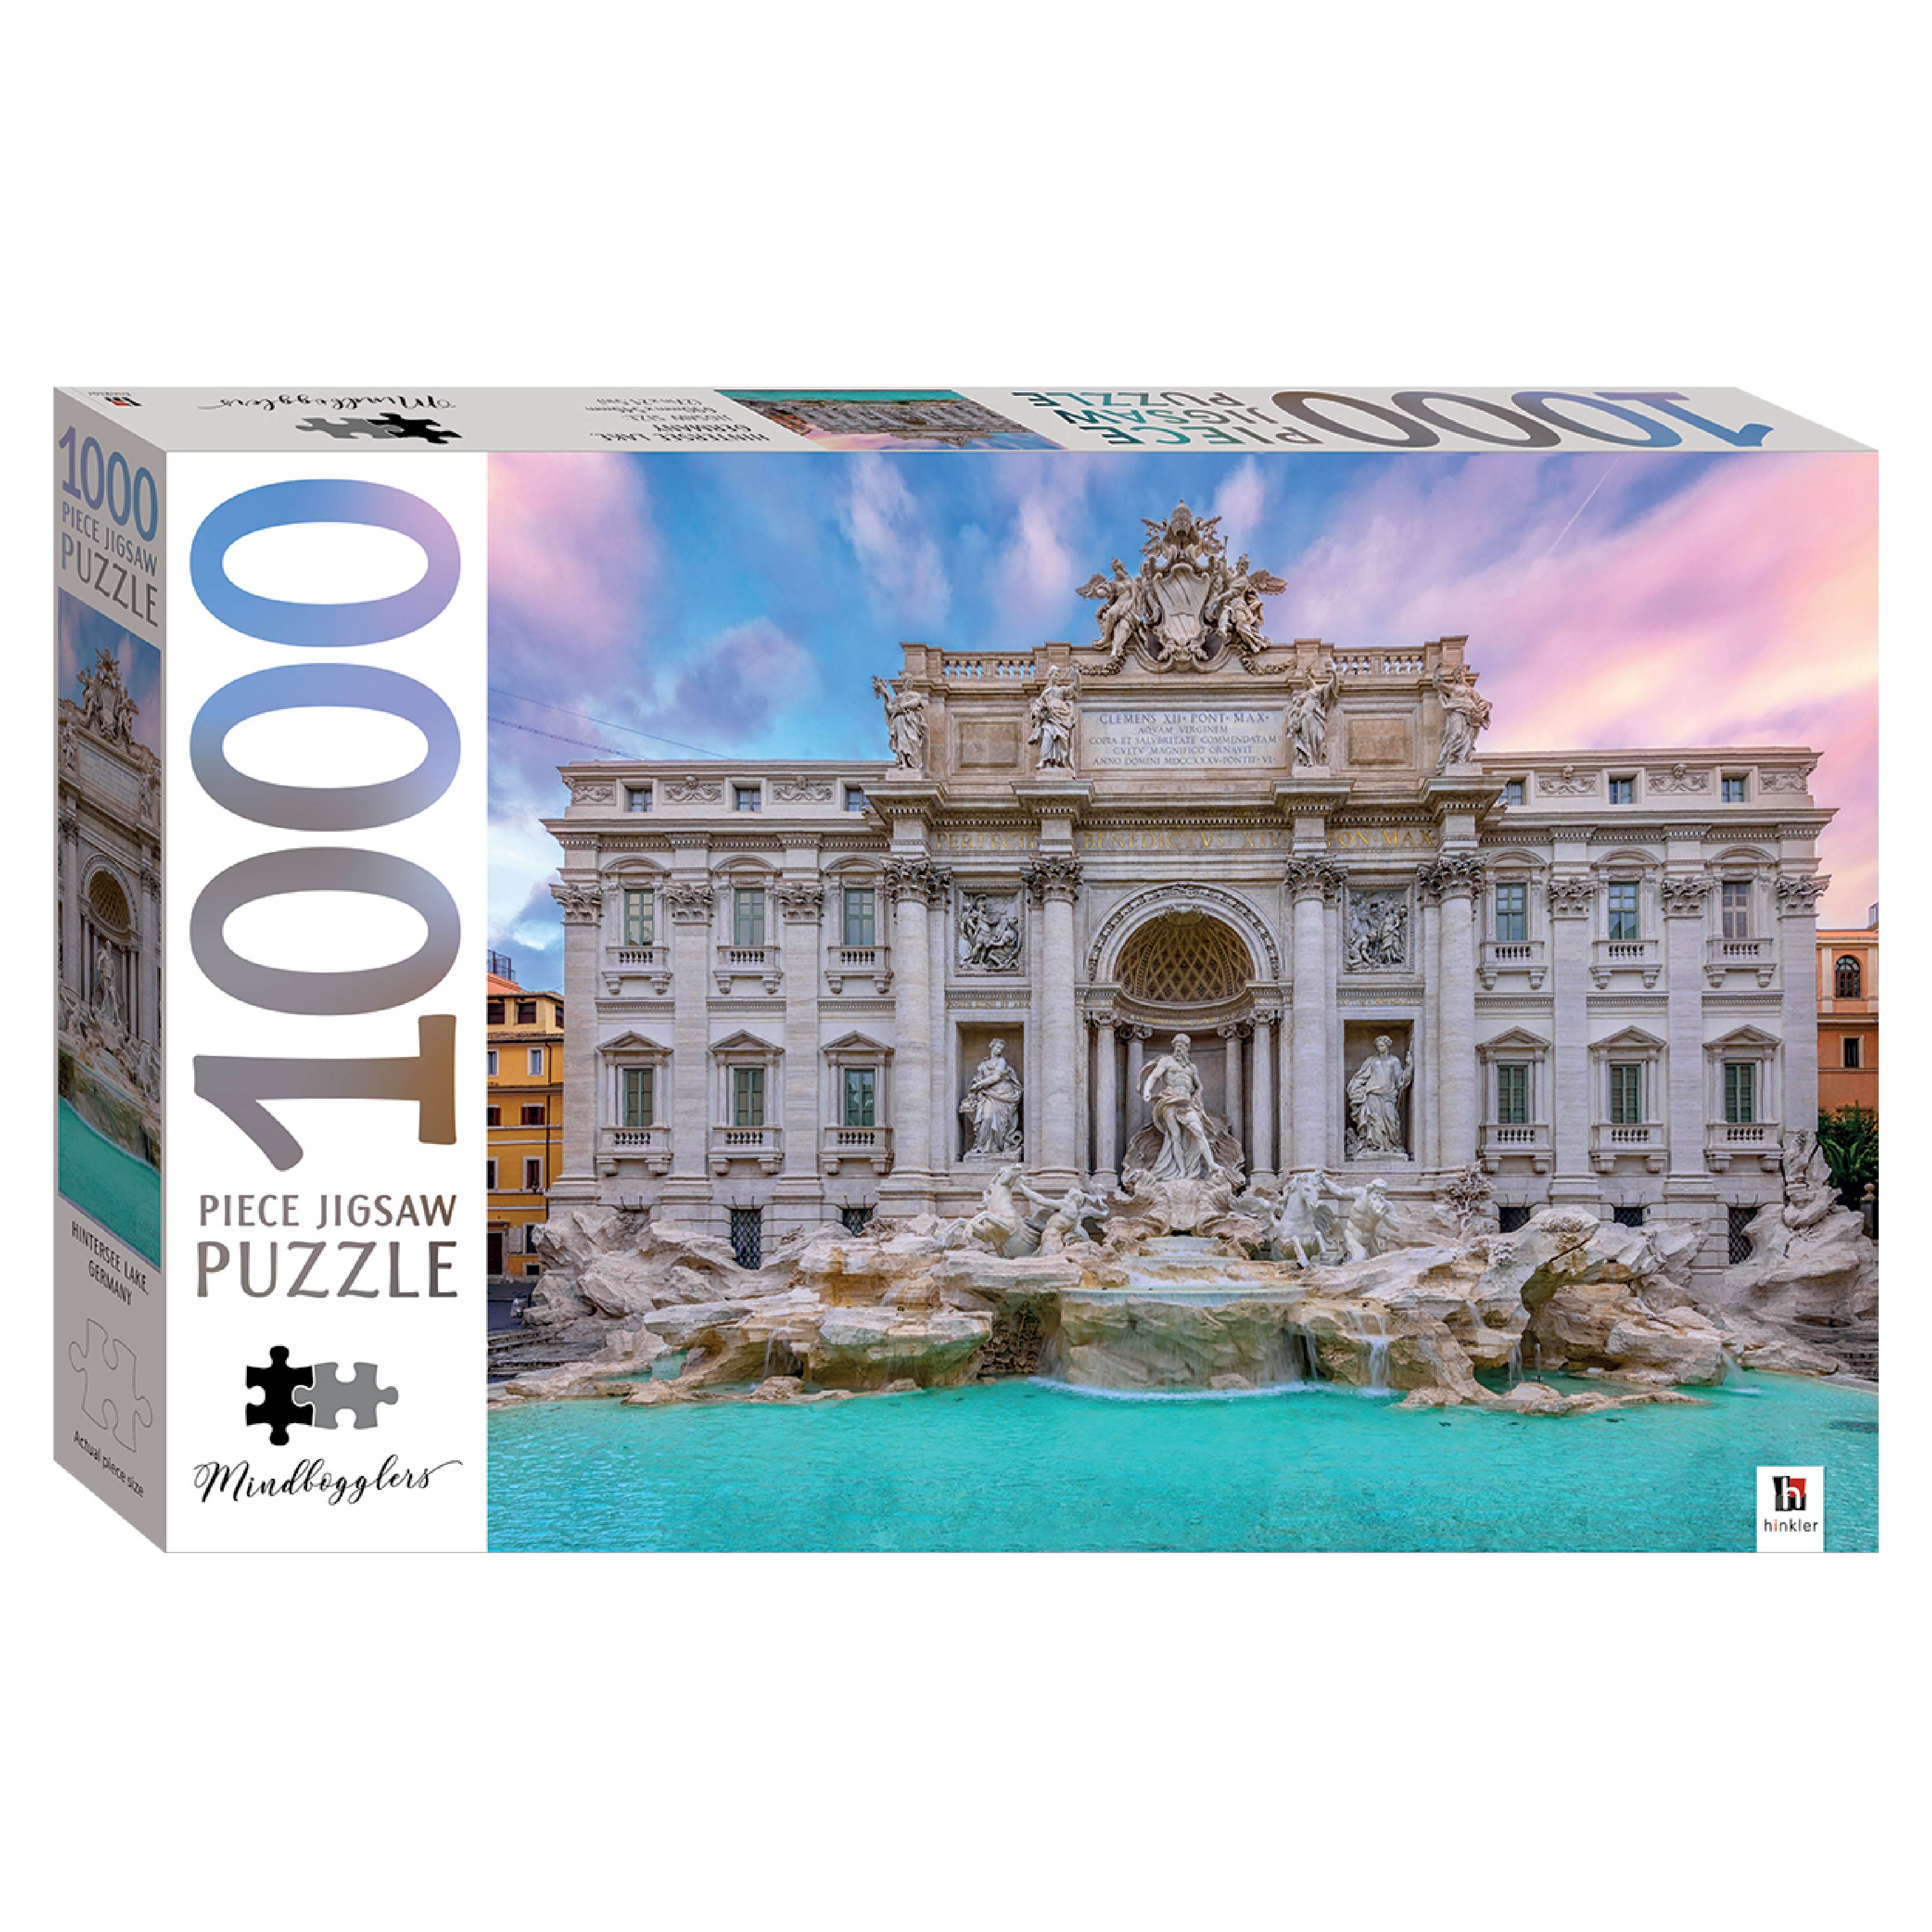 Jigsaw Puzzle - Trevi Fountain Rome Italy (1000 pieces) - _MS, HINKLER, TOYS & GAMES